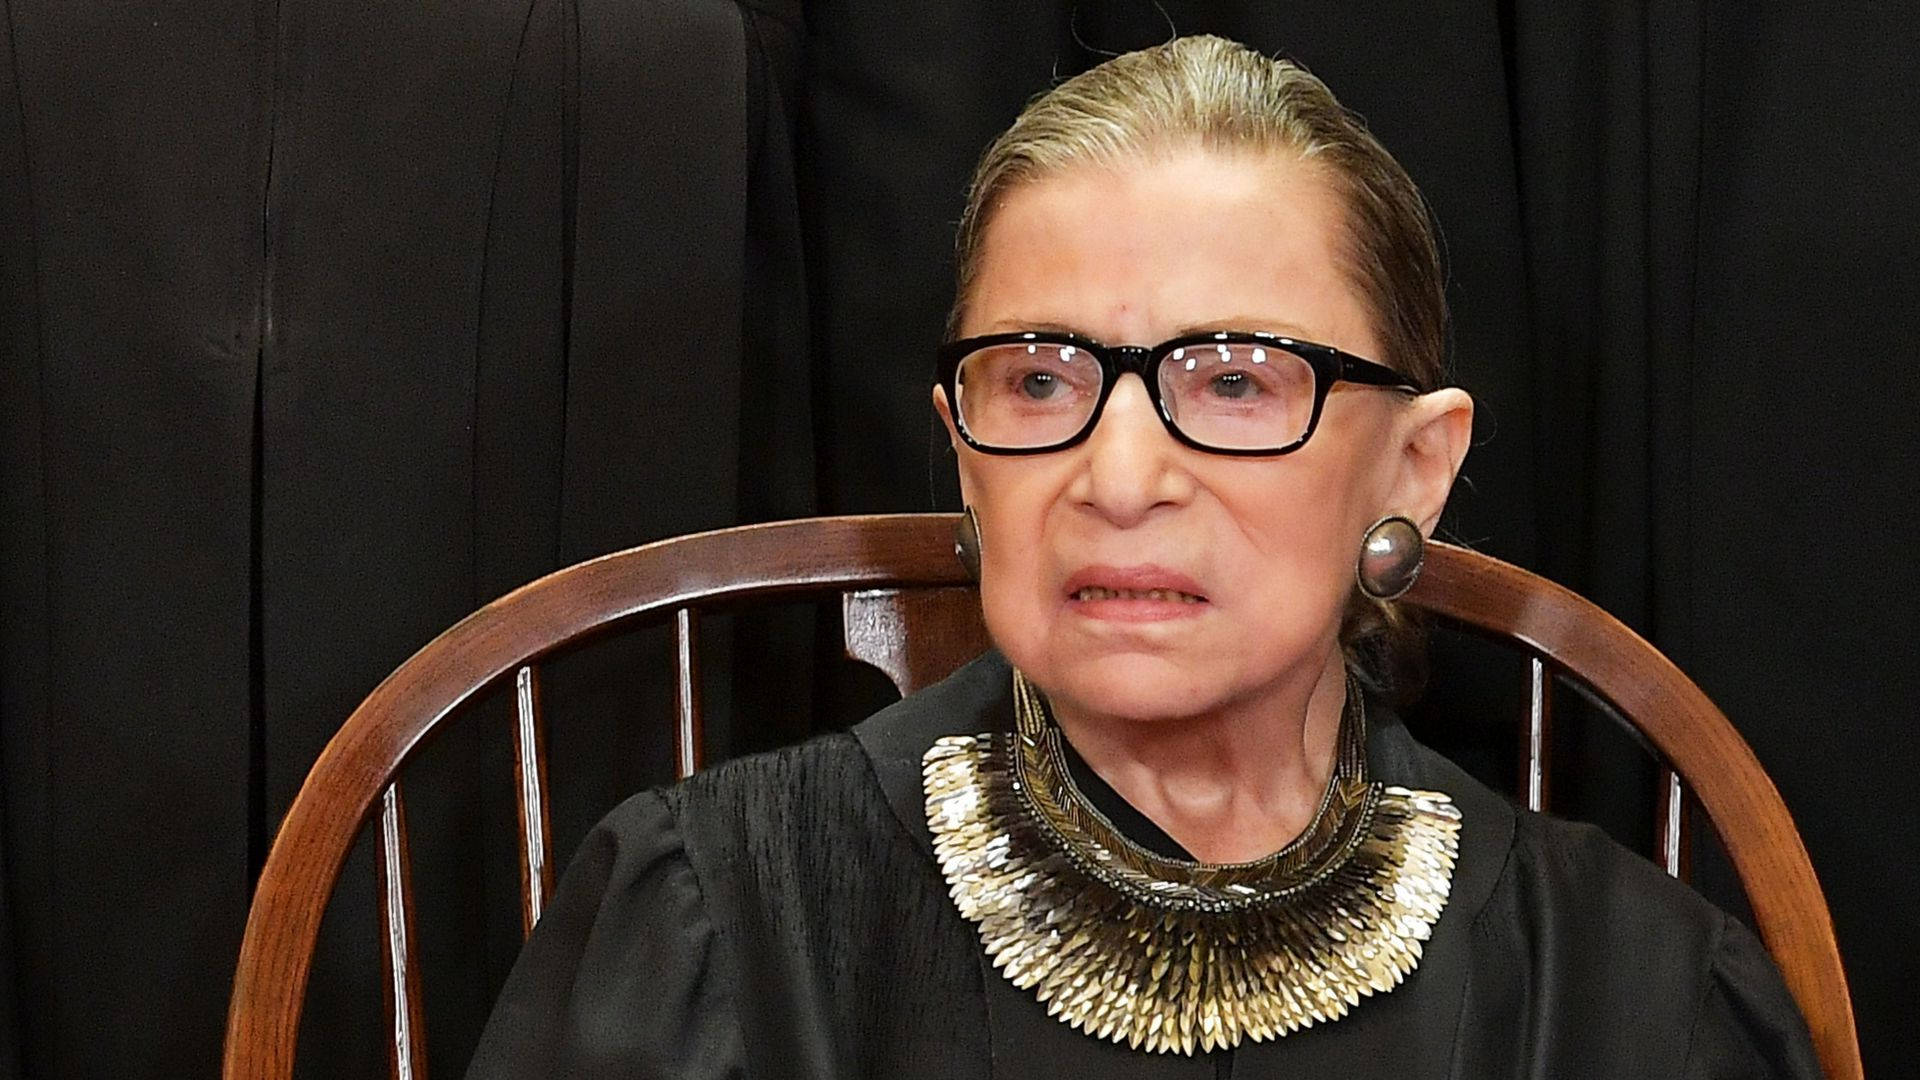 Ruth Bader Ginsburg Iconic Necklace Background